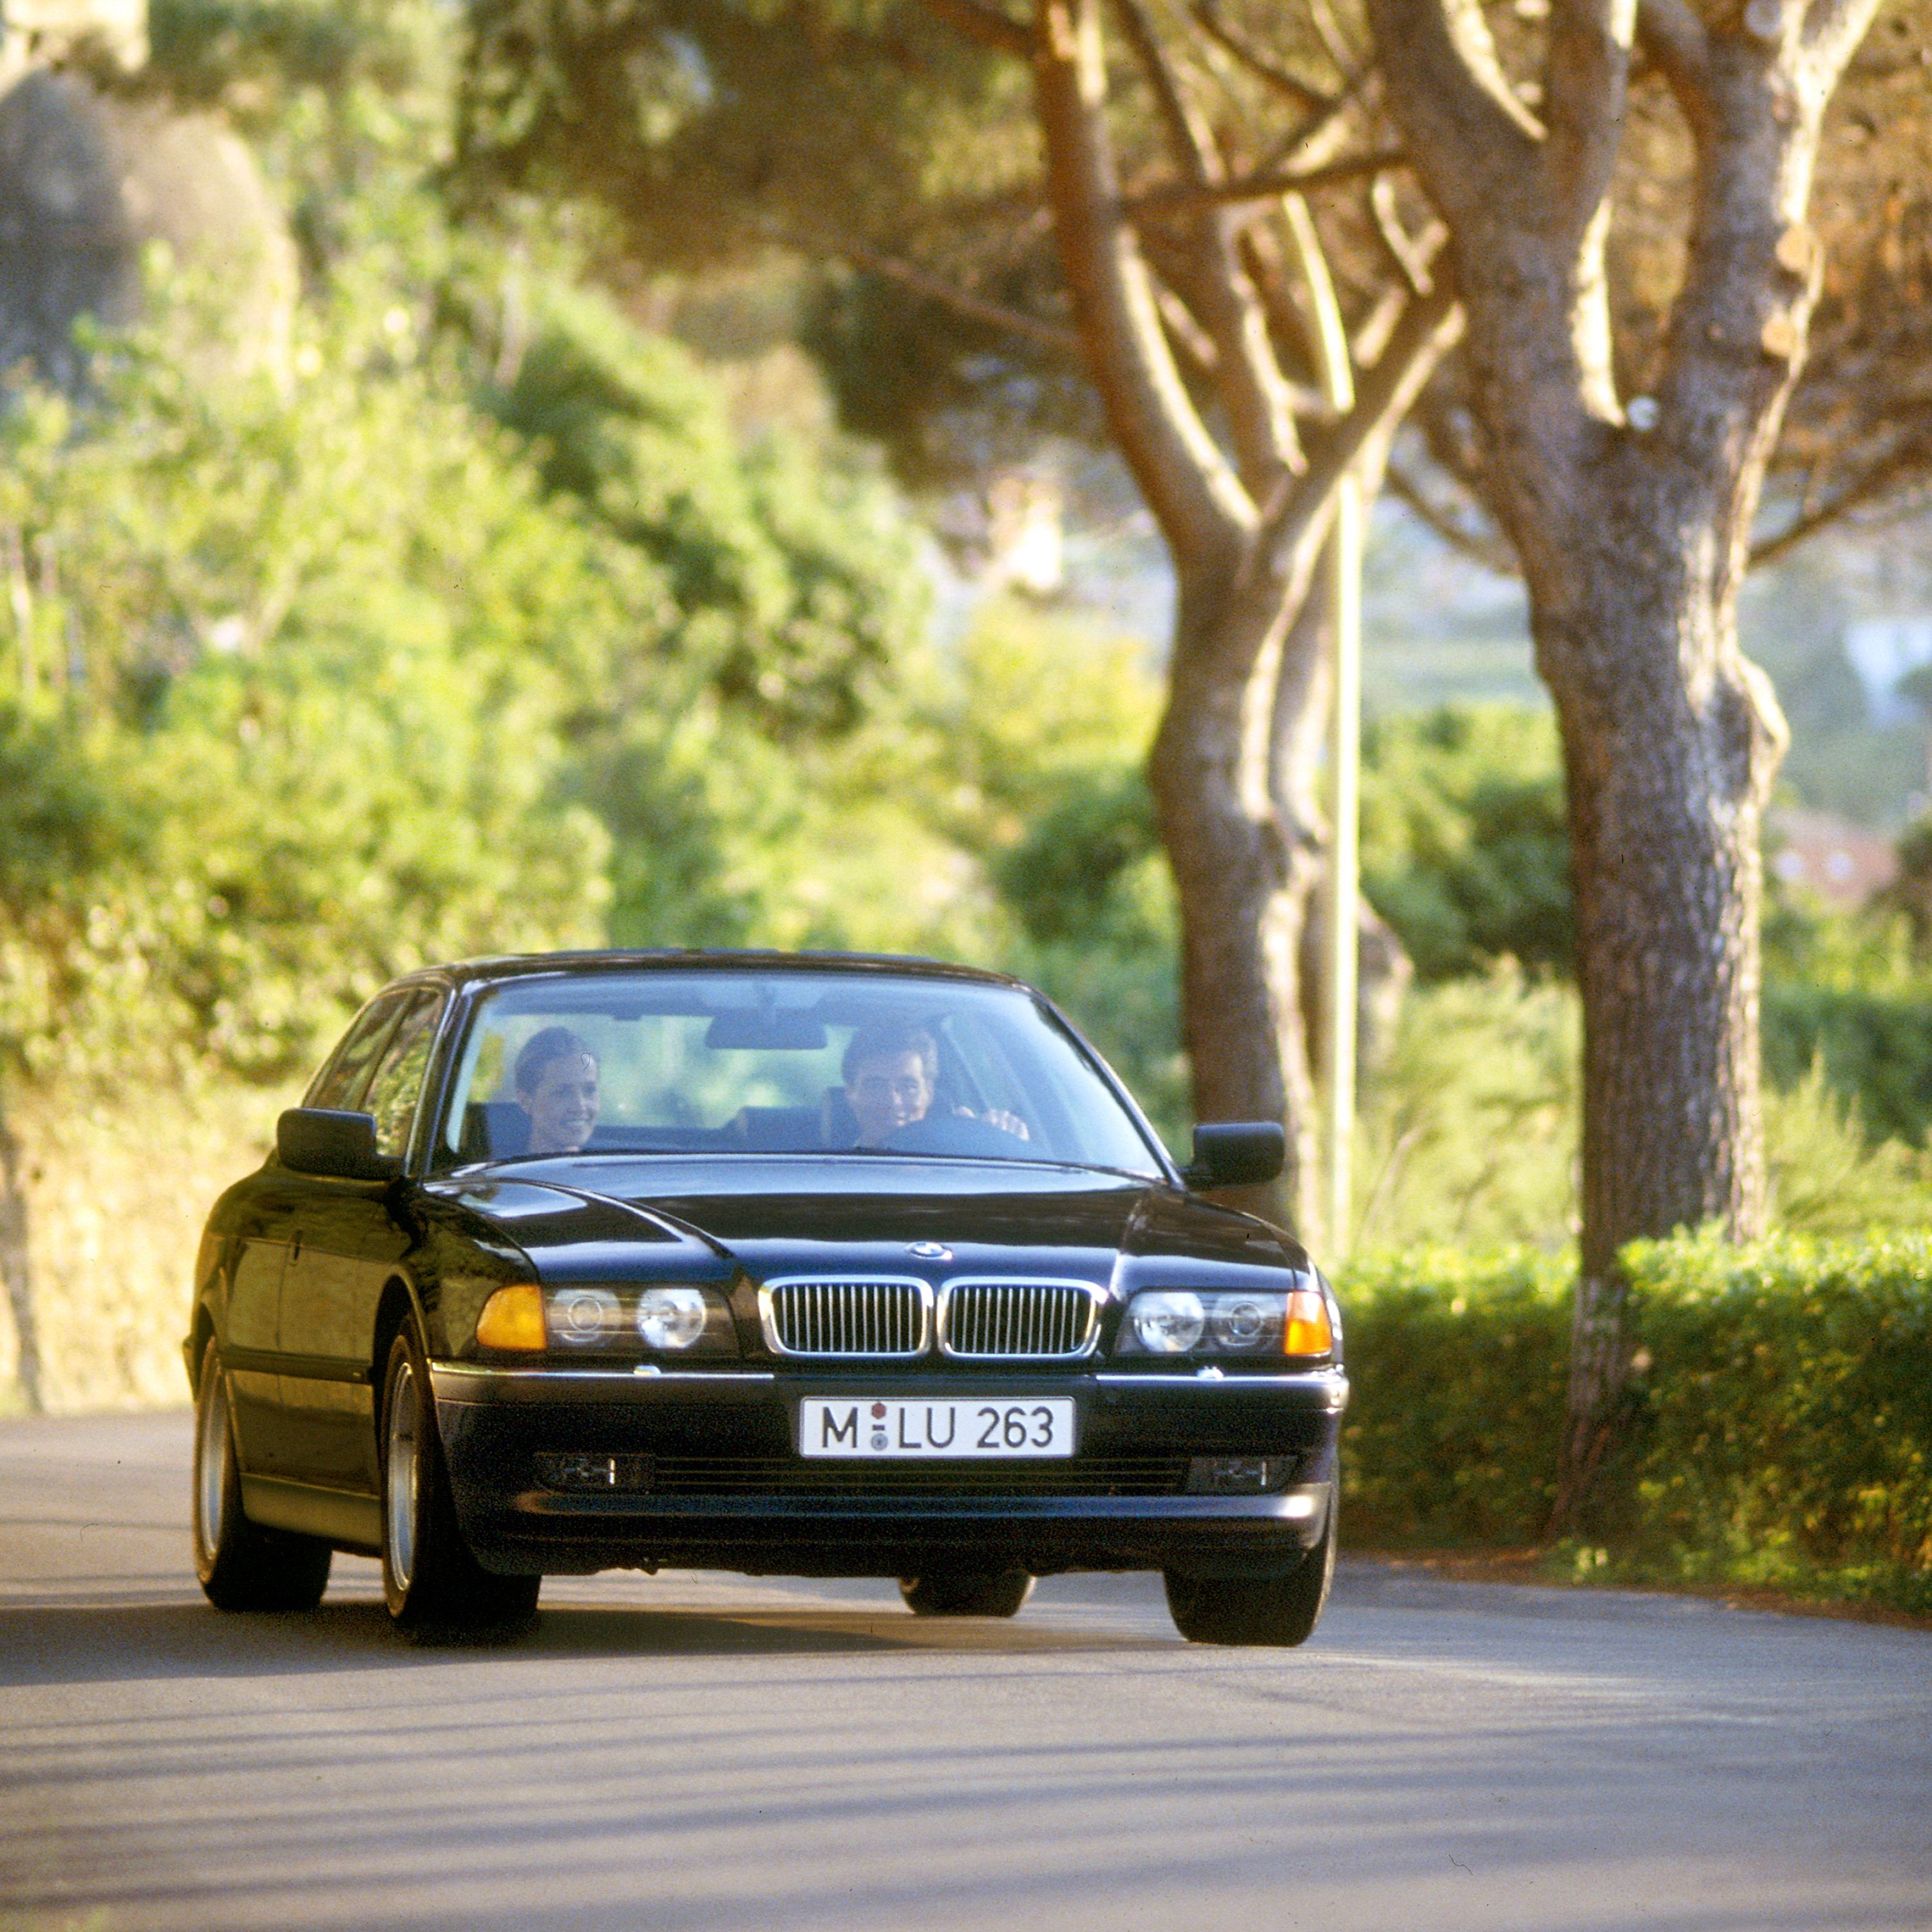 BMW 7 Series Sedan E38 on an avenue in the rural countryside in summer with a small town in the background